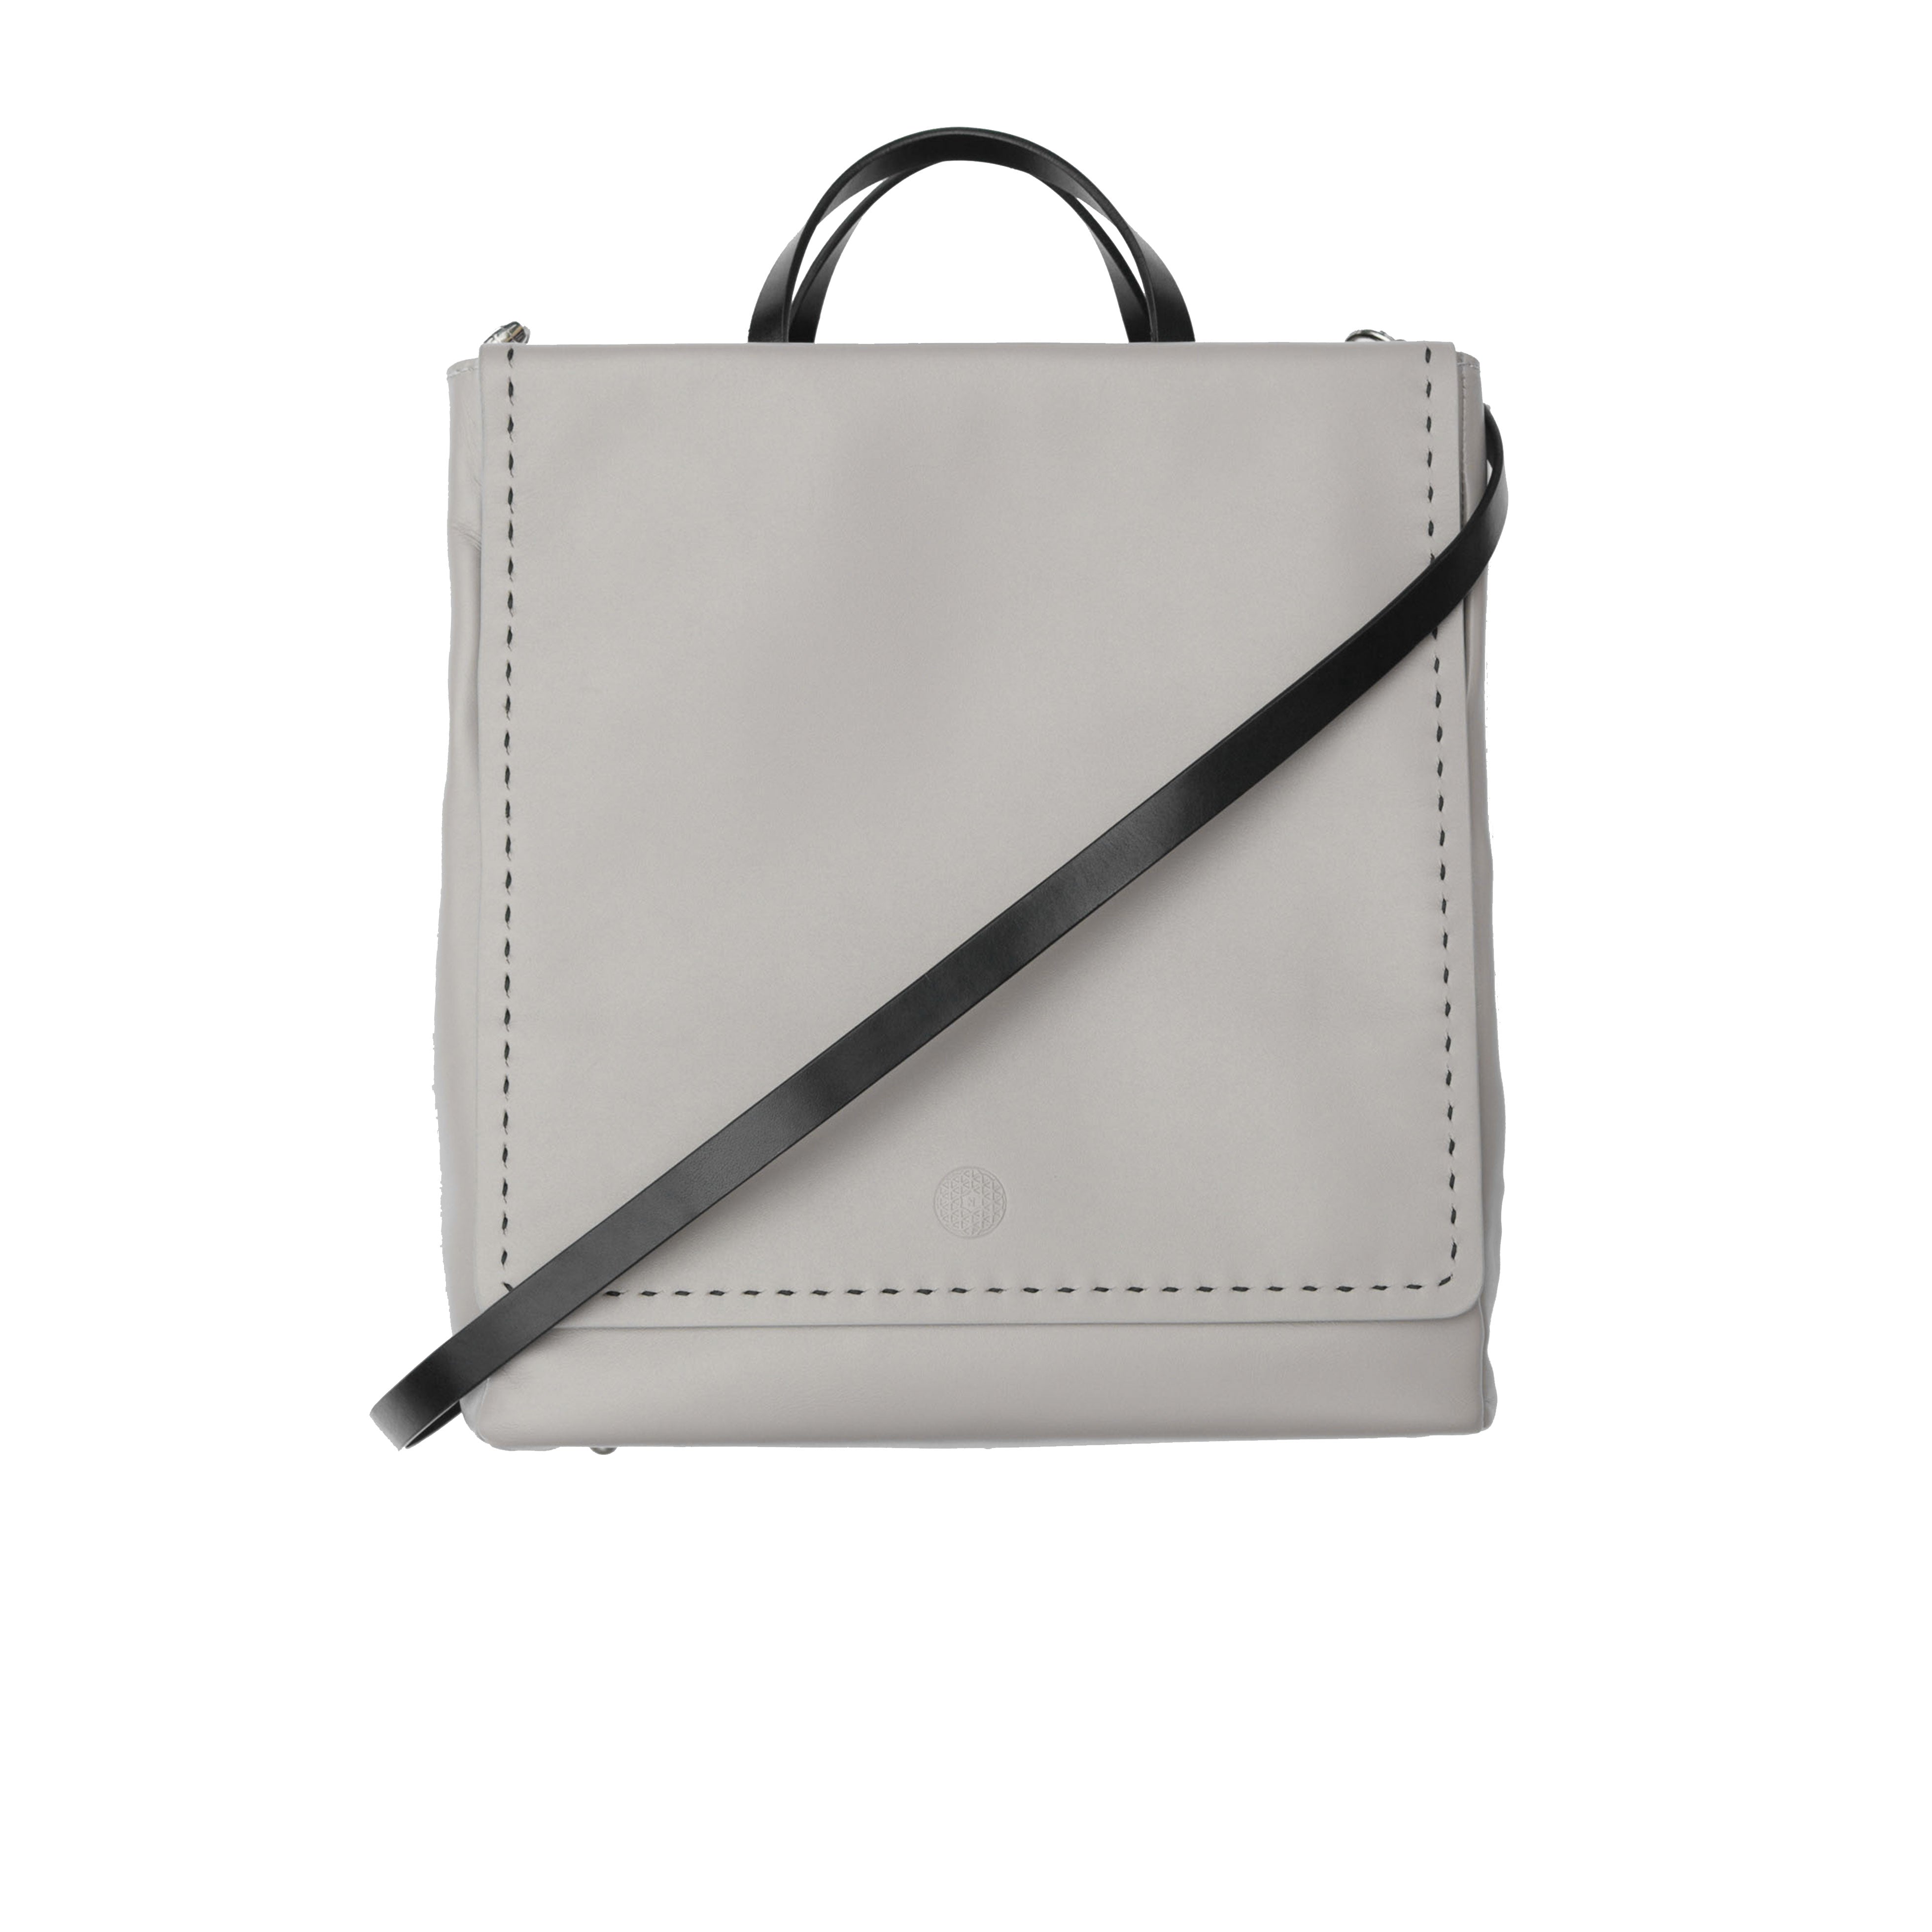 Business Bag in taupe - Kathy